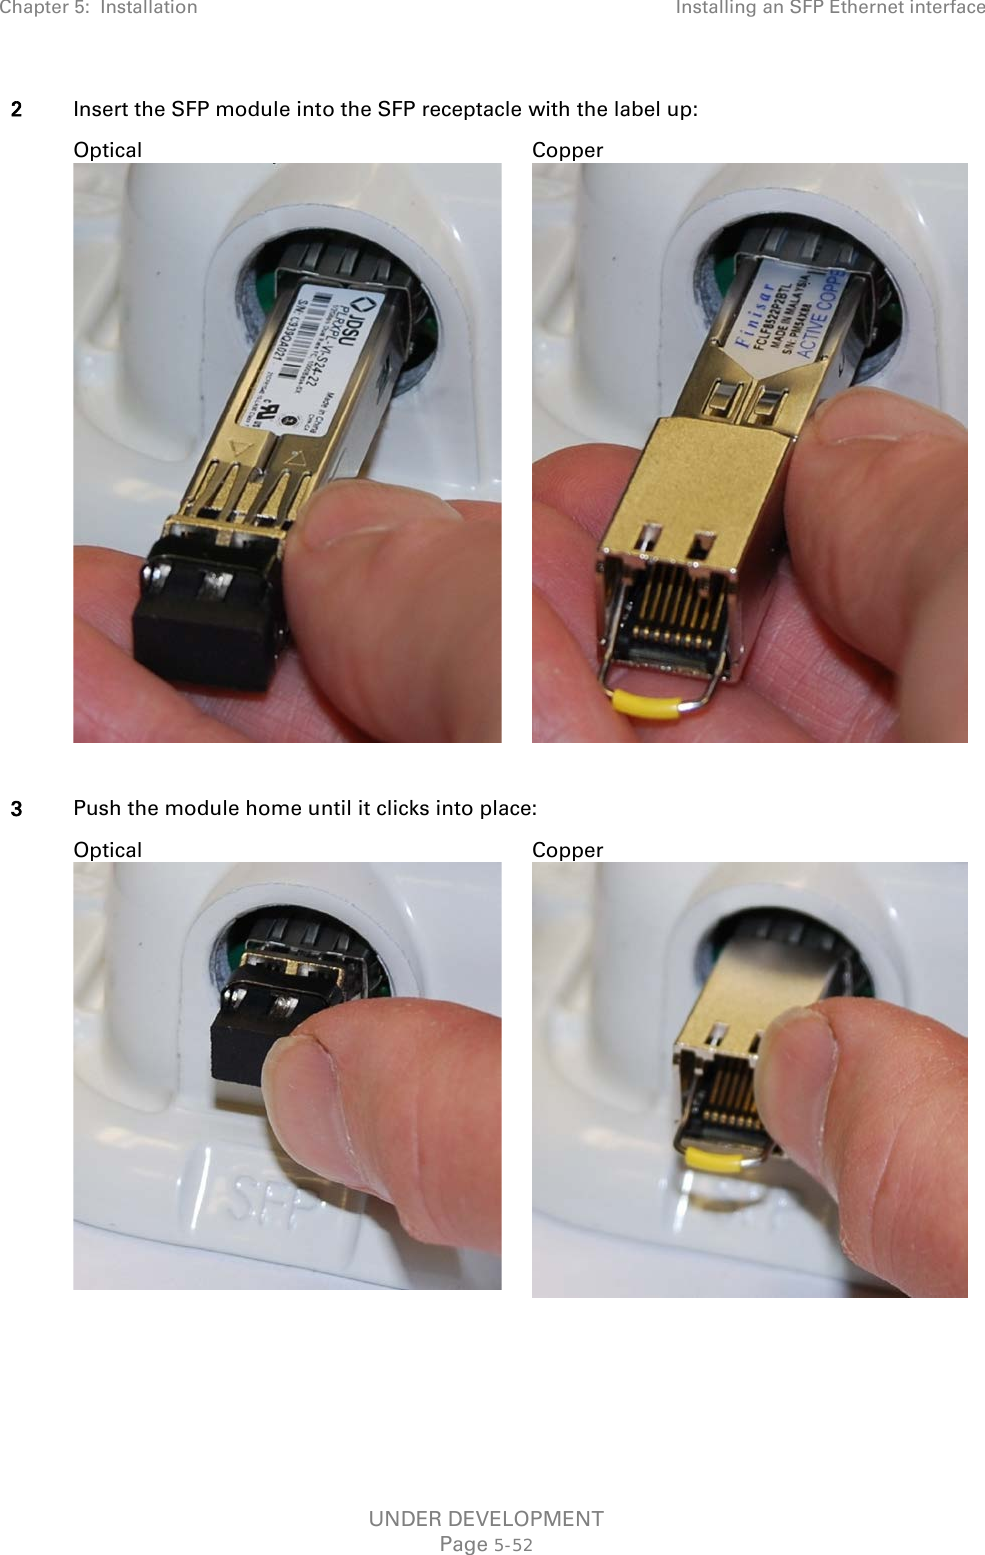 Chapter 5:  Installation Installing an SFP Ethernet interface  2 Insert the SFP module into the SFP receptacle with the label up:   Optical  Copper   3 Push the module home until it clicks into place:  Optical  Copper      UNDER DEVELOPMENT Page 5-52 